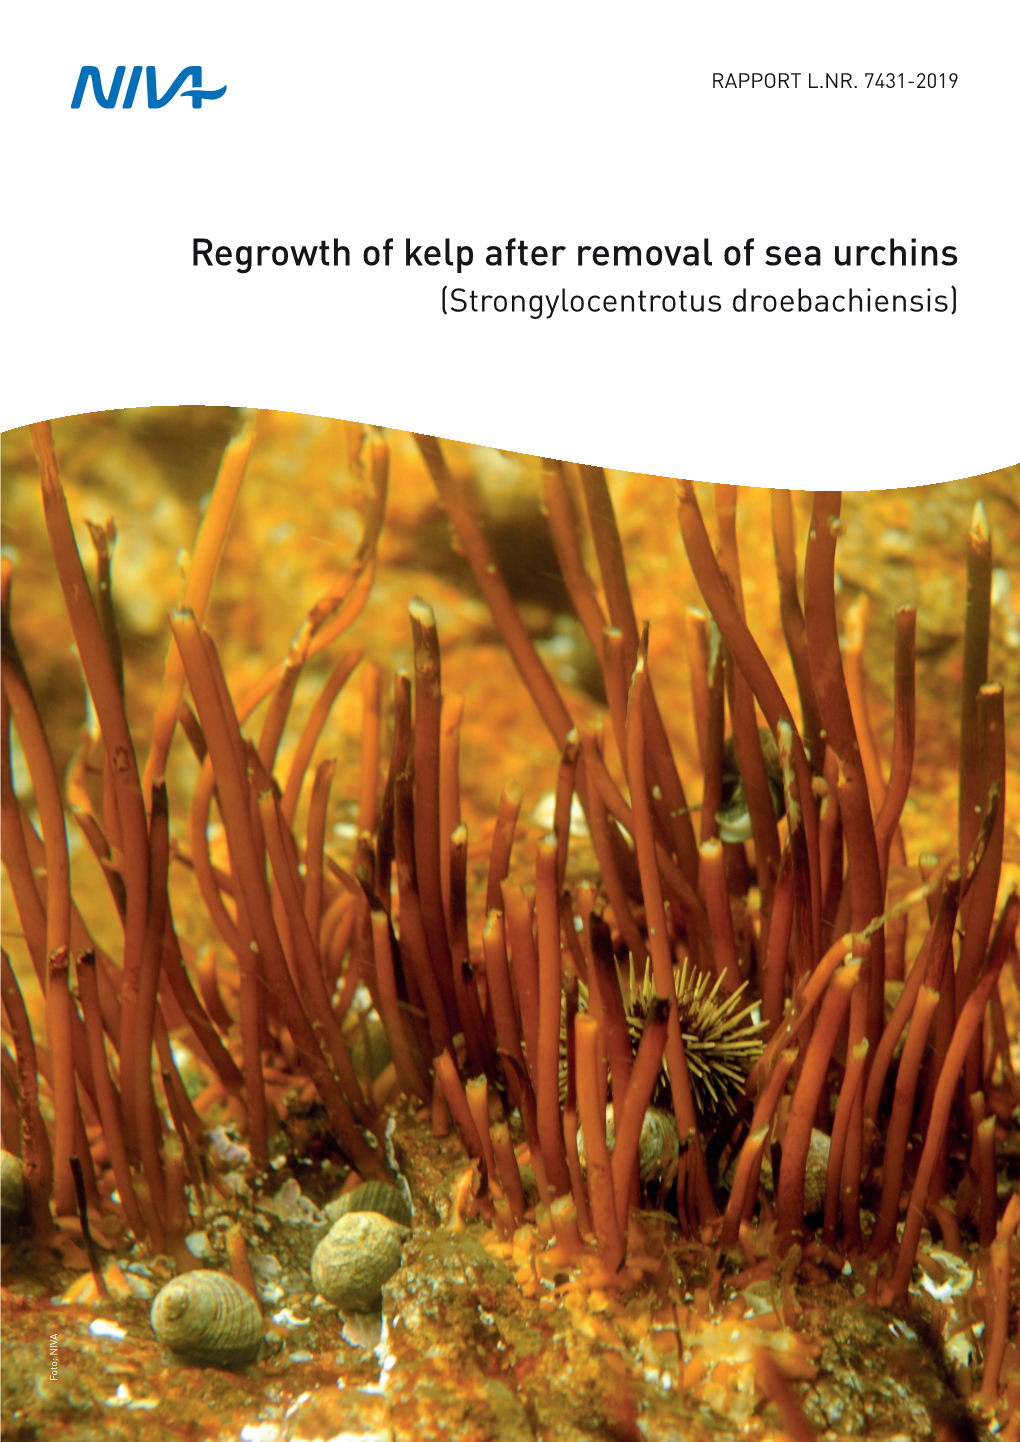 Regrowth of Kelp After Removal of Sea Urchins (Strongylocentrotus